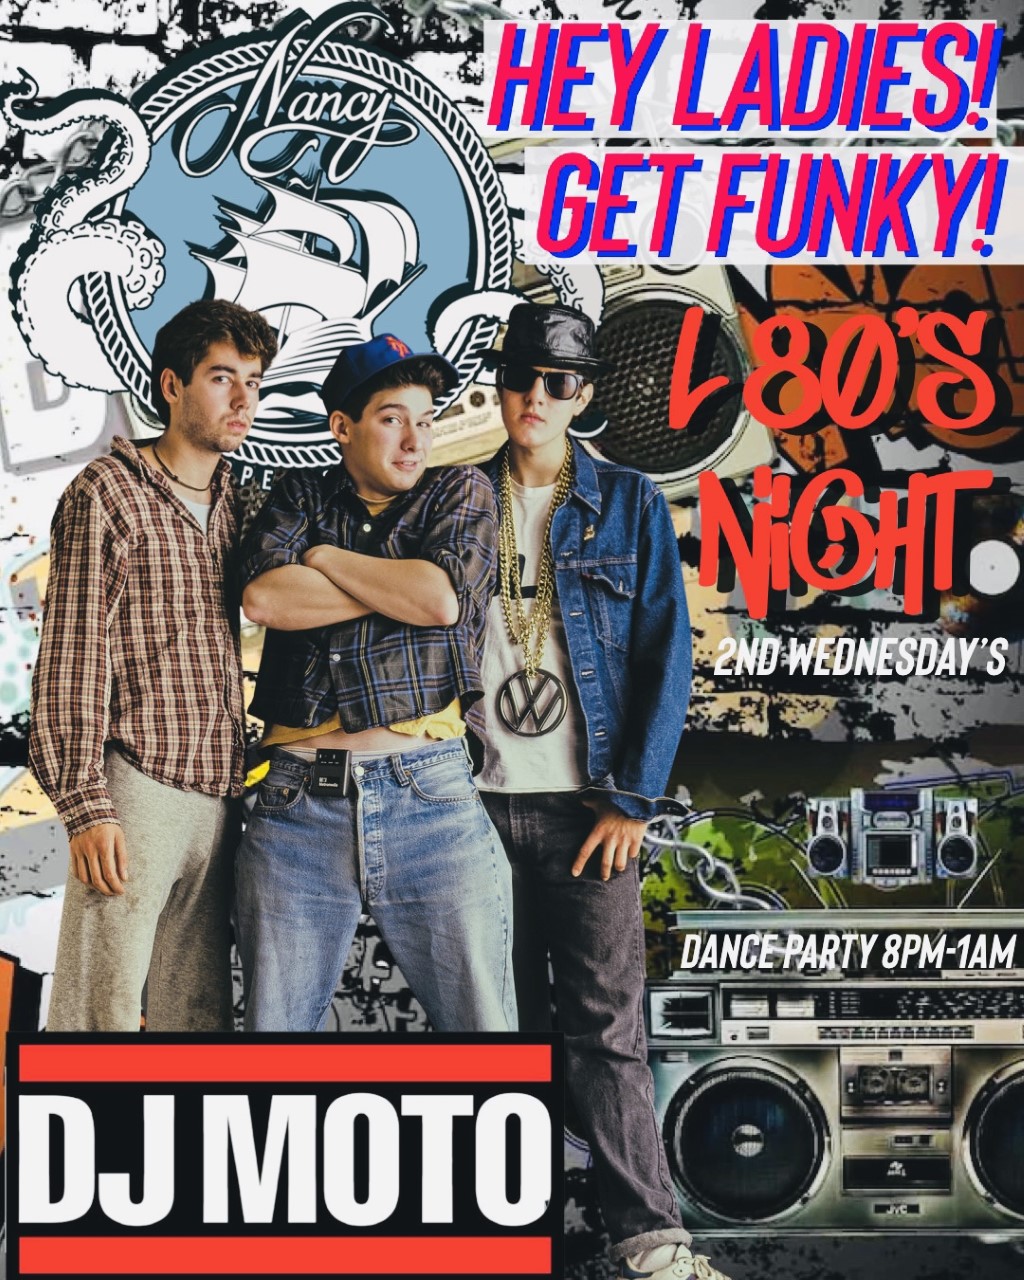 L8O’s NIGHT AT BAR NANCY - DJ MOTO - DANCE PARTY 8PM-1AM - 2ND WEDNESDAY'S